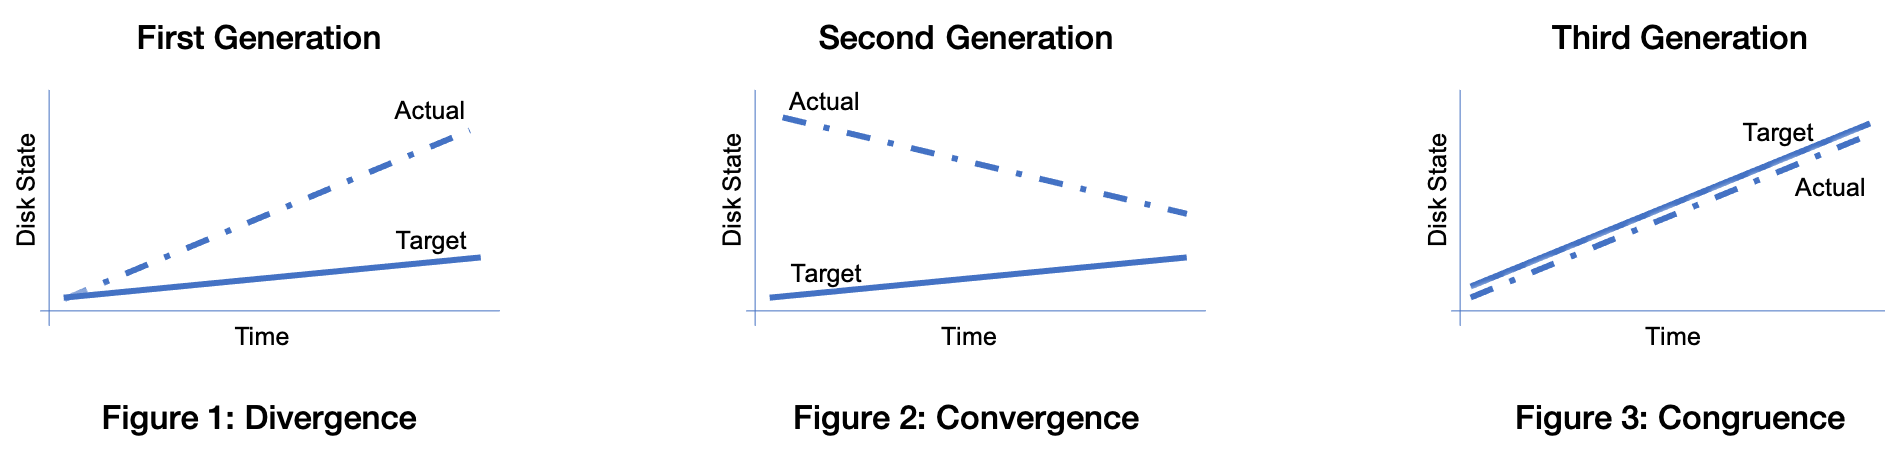 Divergence - Convergence - Congruence